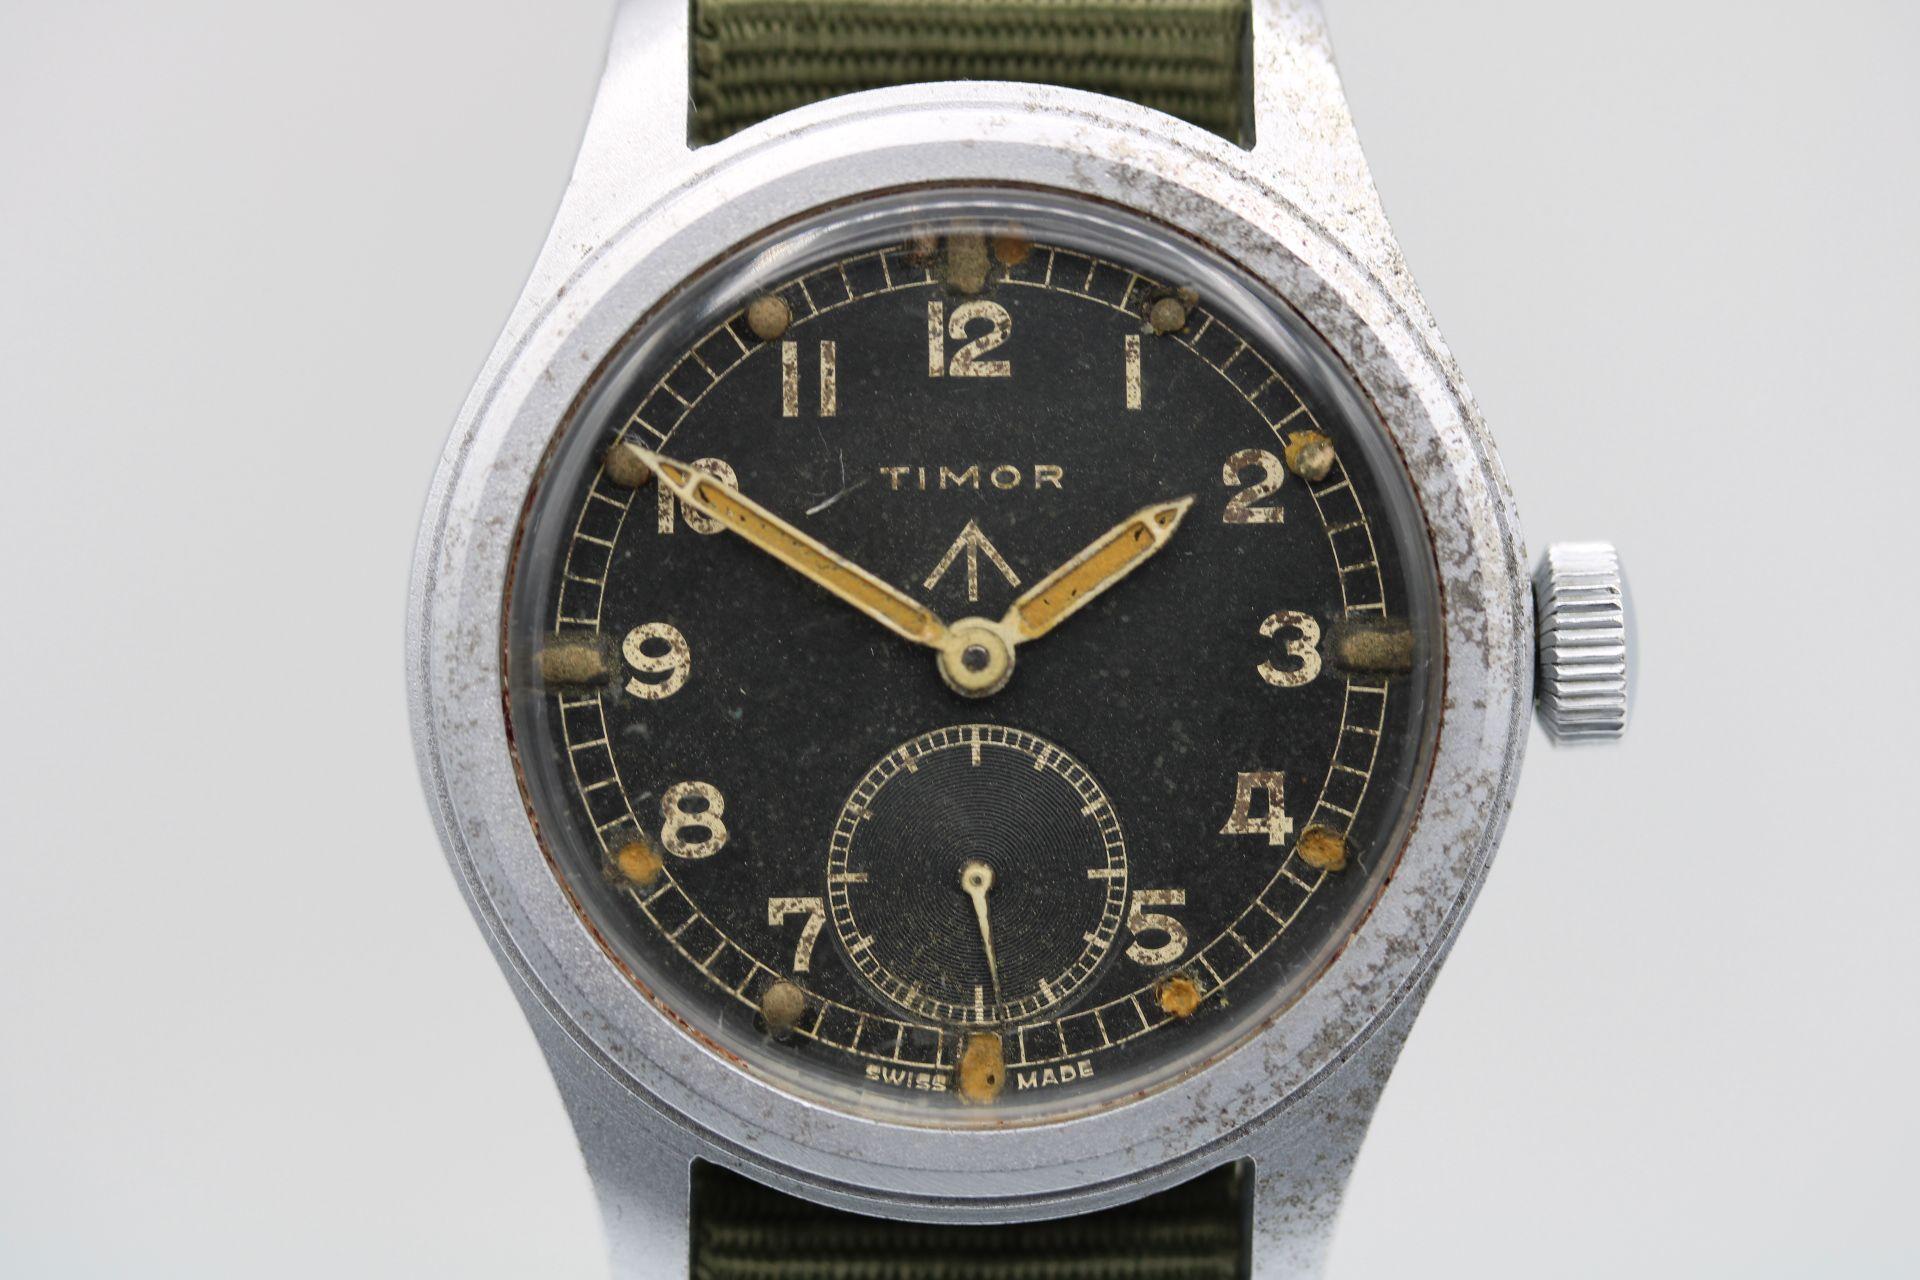 Part of the collectable and sought after so called ' Dirty Dozen' British Military watches from the second World War. 

This Timor is an original example of the watch, yes it shows some wear and tear and most likely battle hardened but appears to